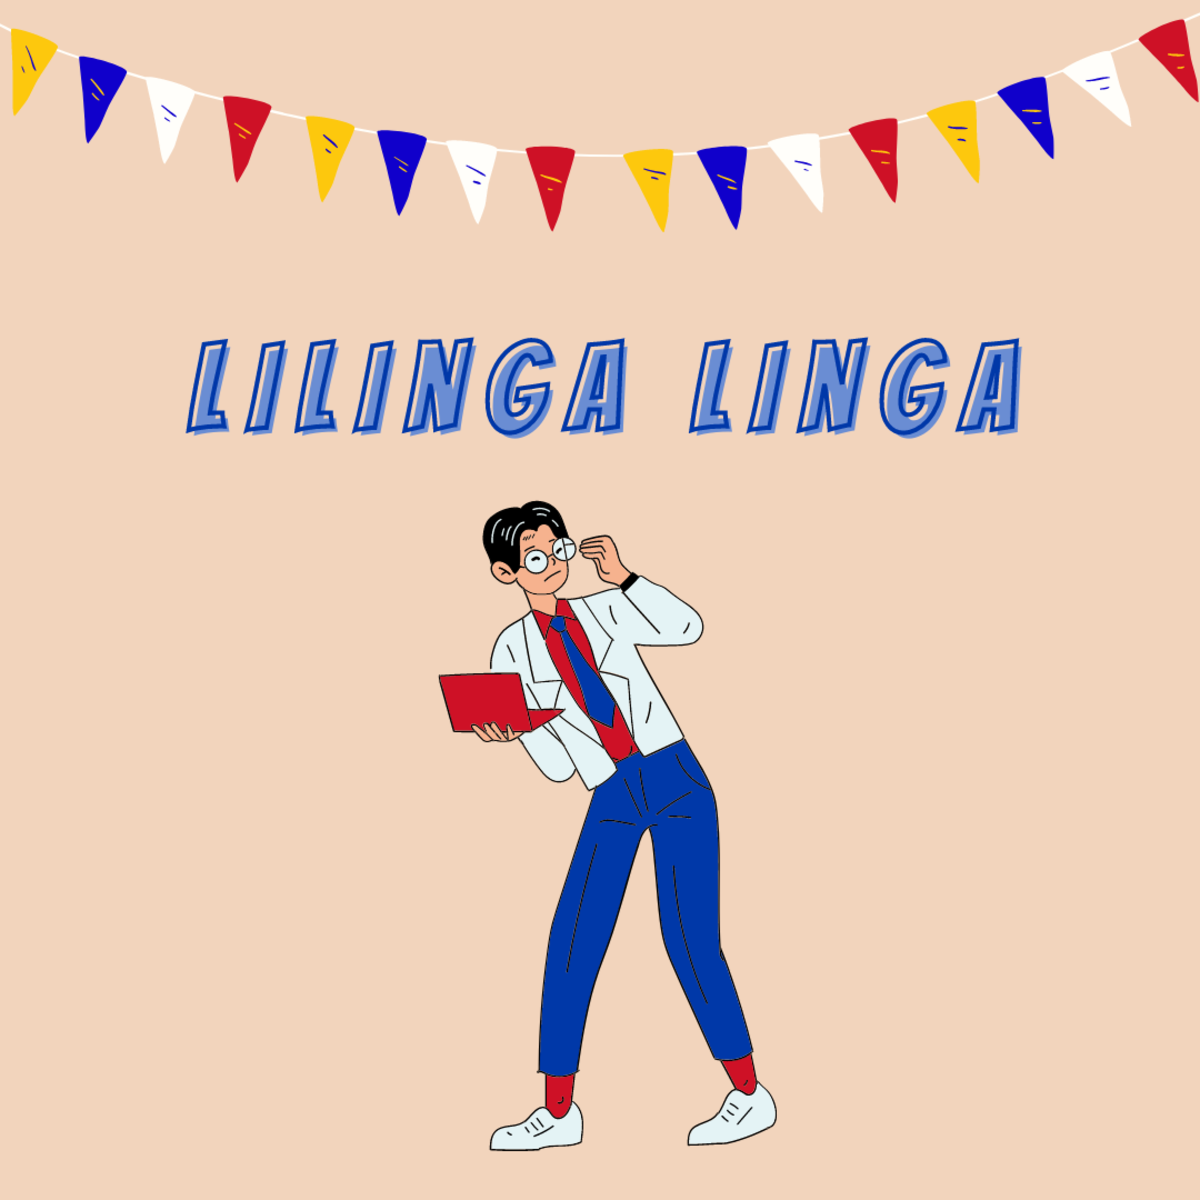 "Lilinga linga"—when you're looking for someone but having a hard time finding them